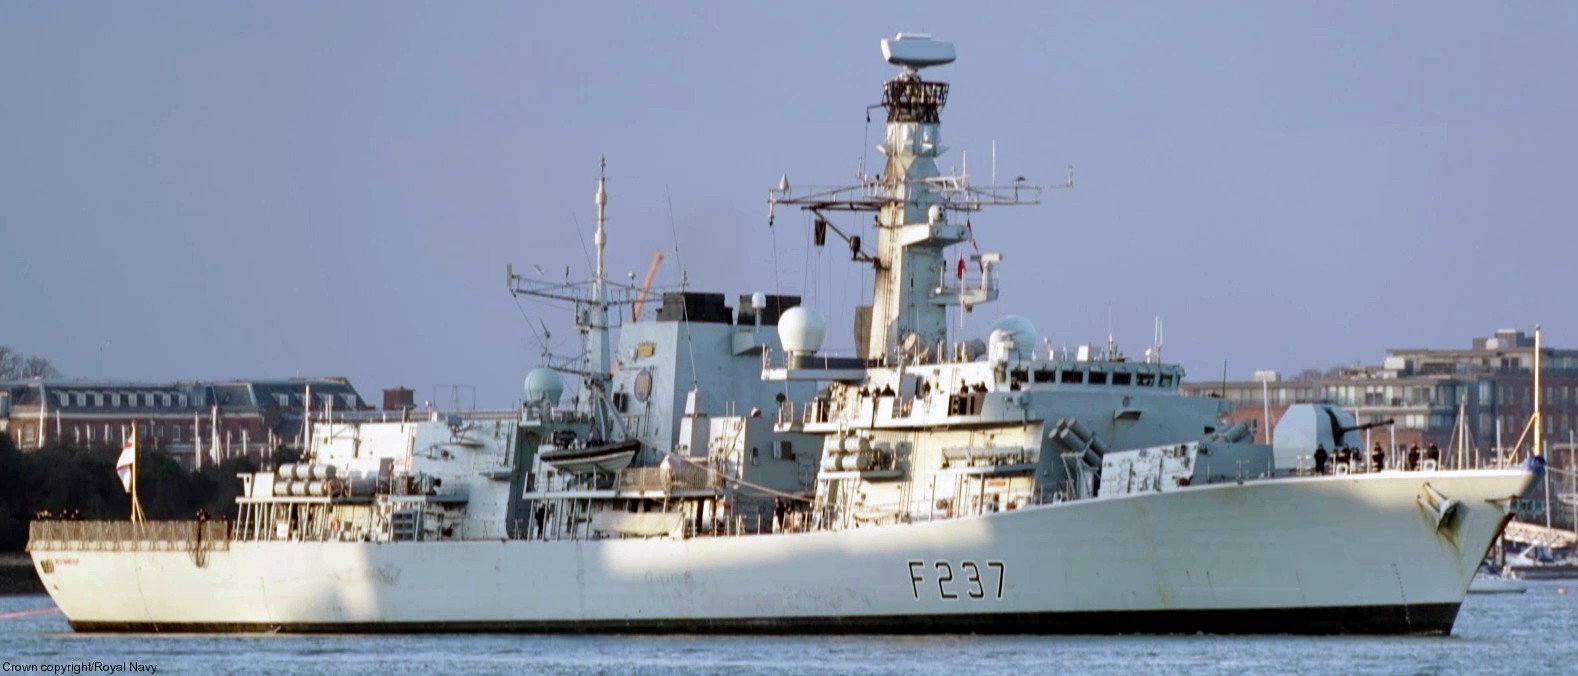 f-237 hms westminster type 23 duke class guided missile frigate ffg royal navy 20 hmnb portsmouth